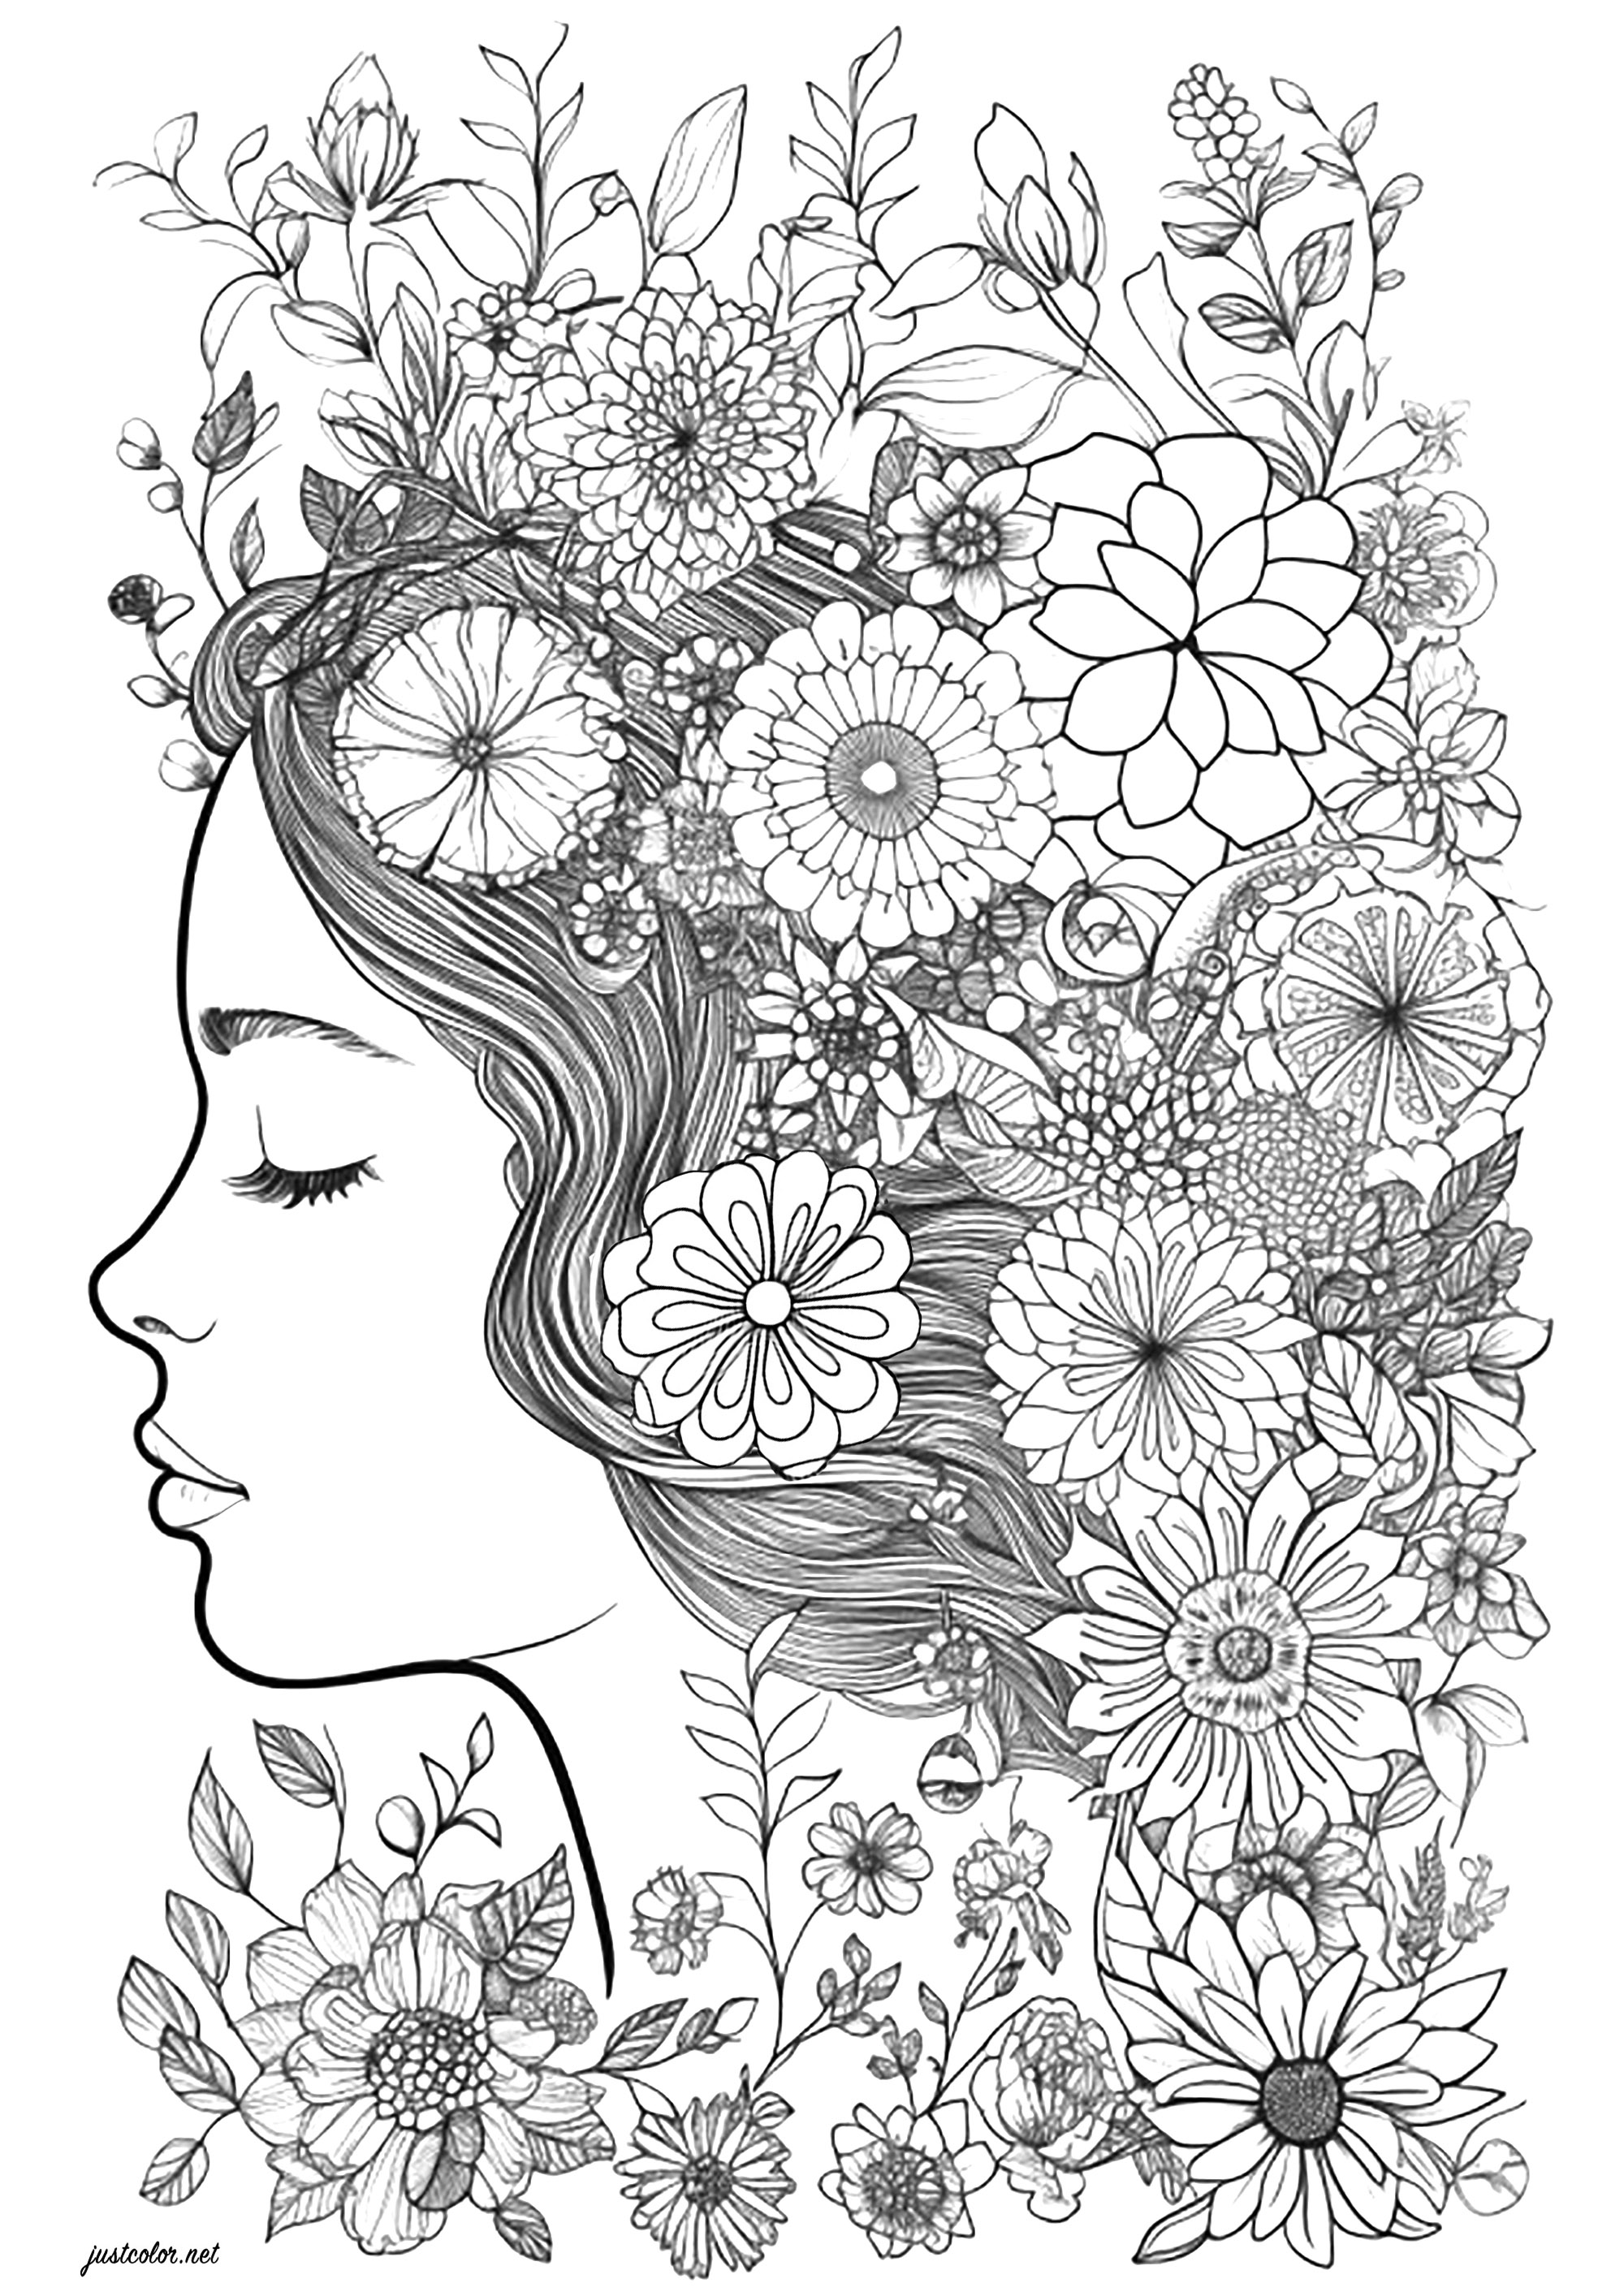 Face of a woman with closed eyes, surrounded by flowersSuperb coloring of a woman's face in profile, whose hair is filled with beautiful flowers